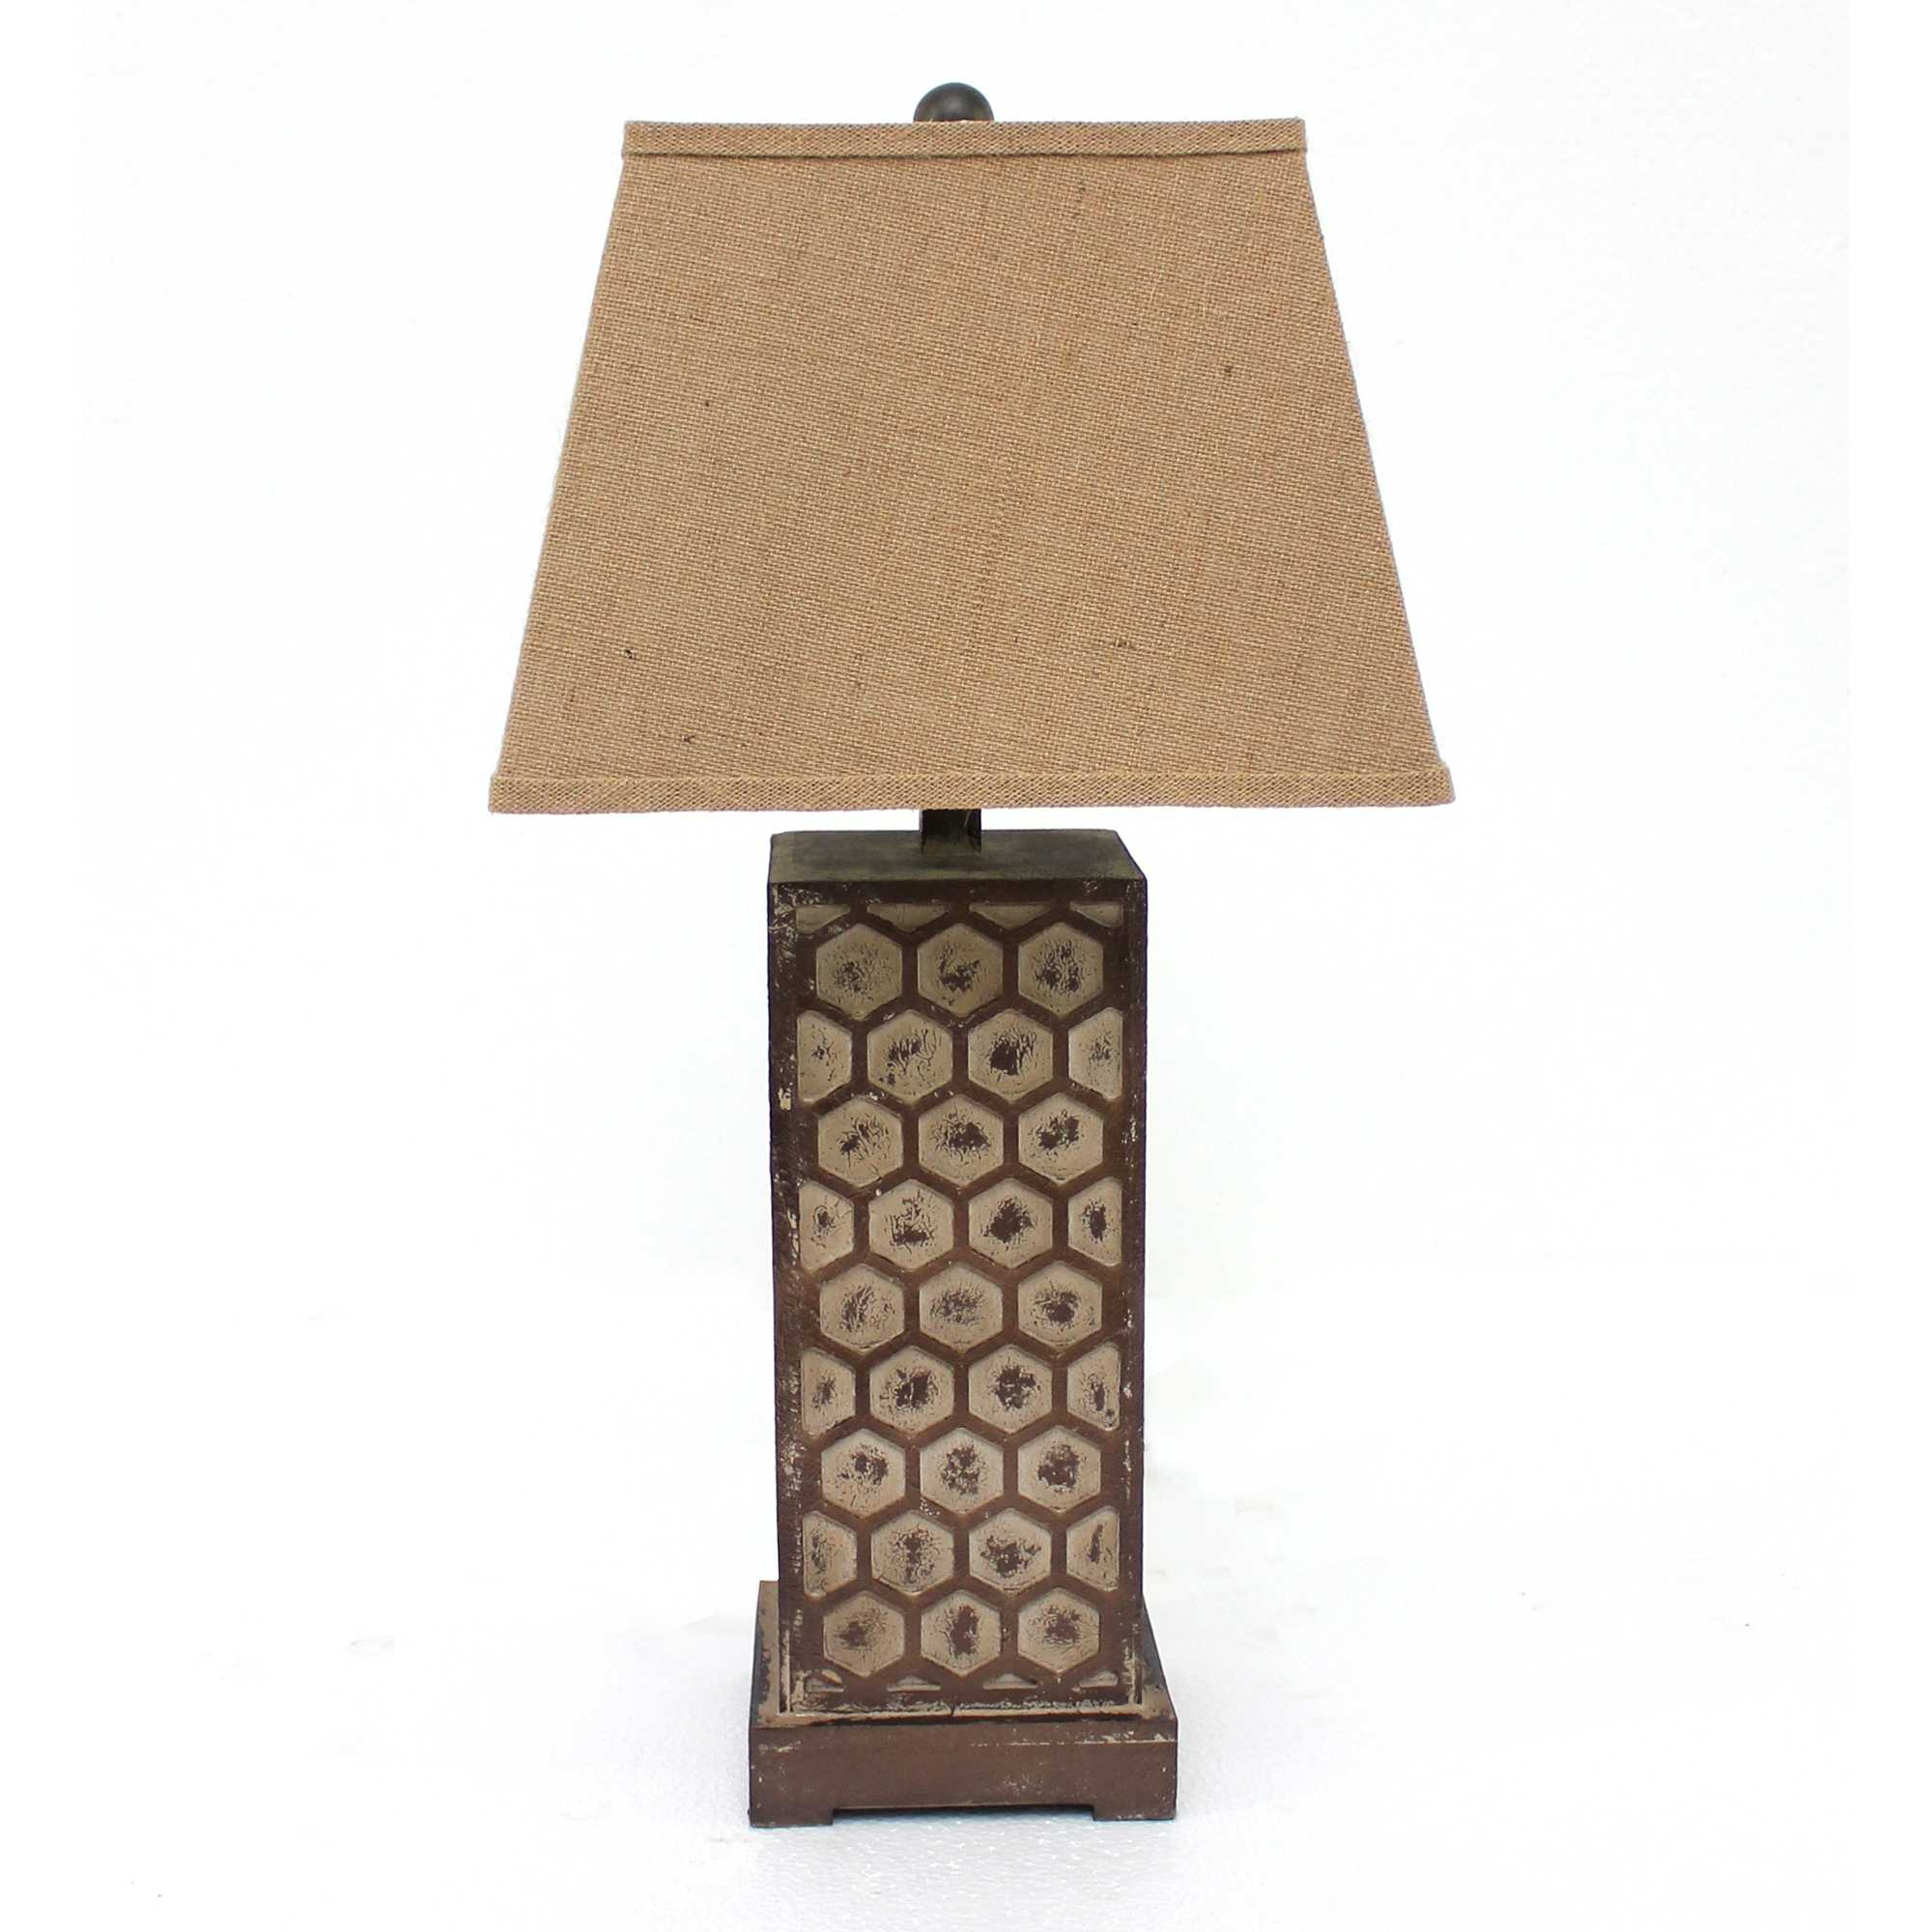 7" x 7" x 28.5" Brown, Industrial With Honeycombed Metal Base - Table Lamp